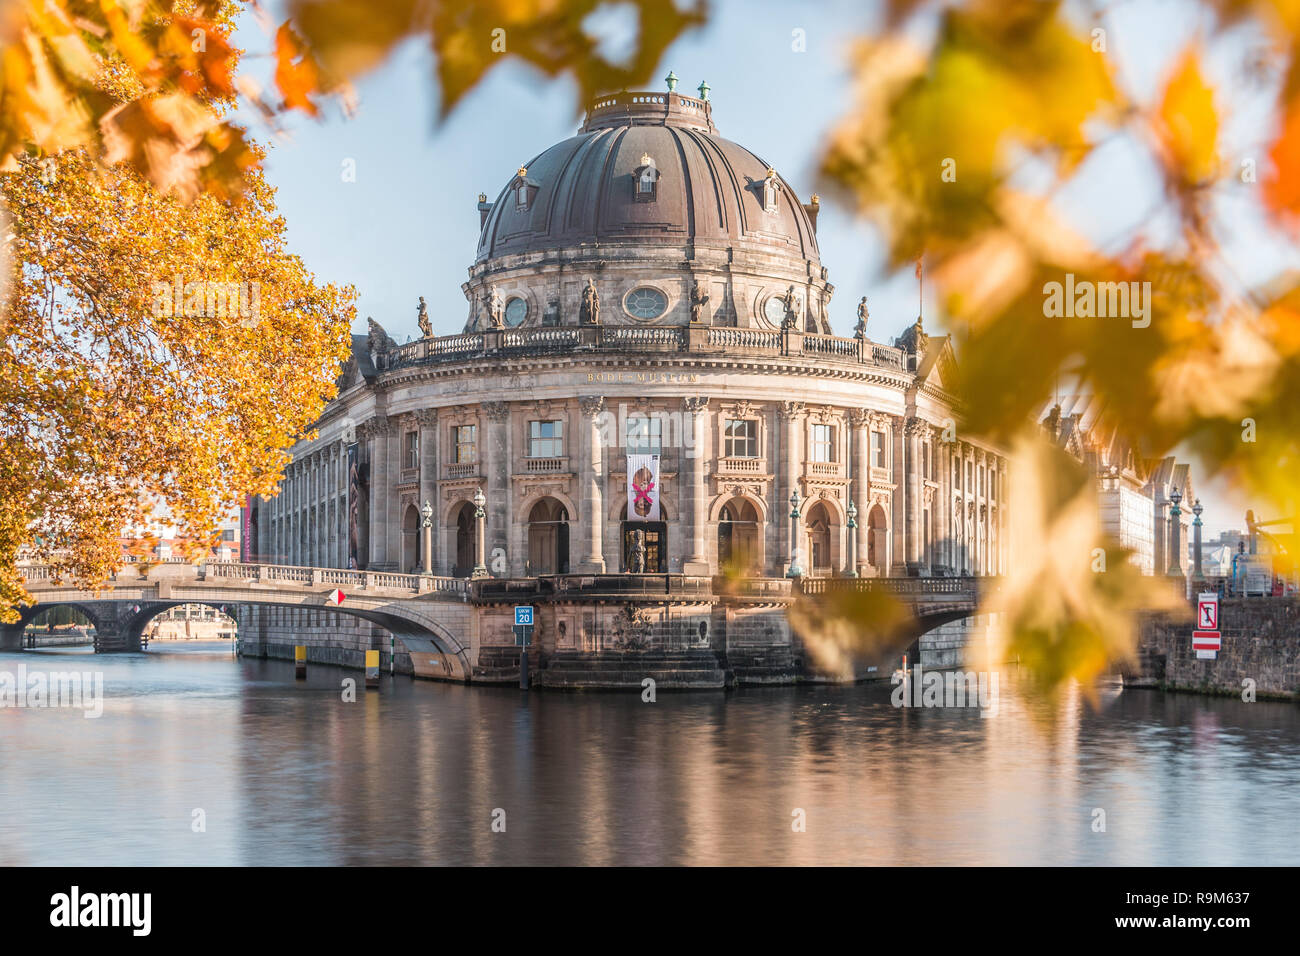 Bode museum in autumn mood. Museum Island in Berlin, capital of Germany, on sunny day with the River Spree and leaves from the tree on a bridge Stock Photo